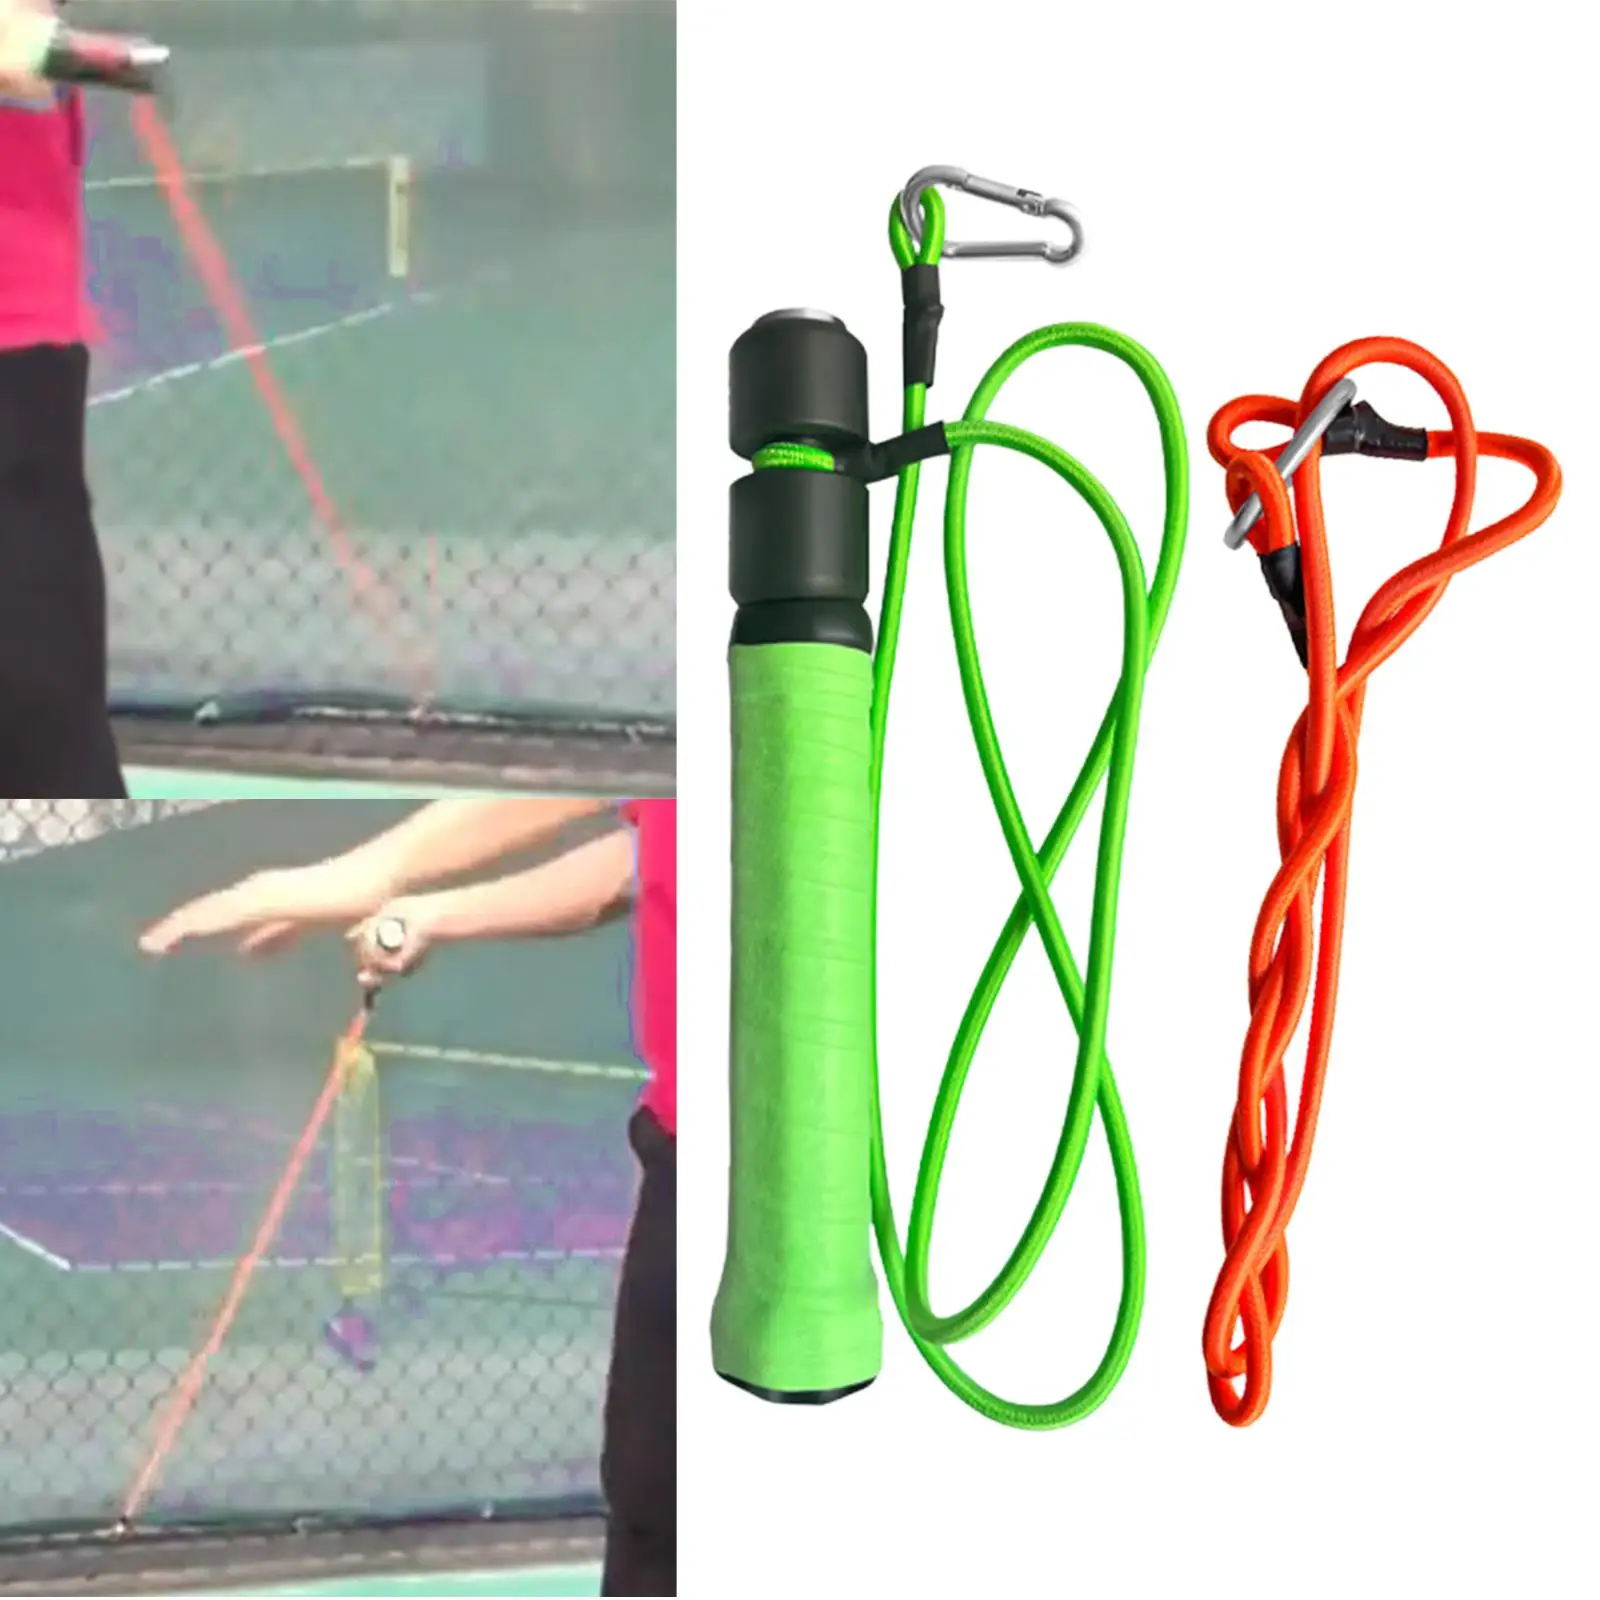 Tennis Trainer Belt Swing Practice Workout sports Rotating Exerciser